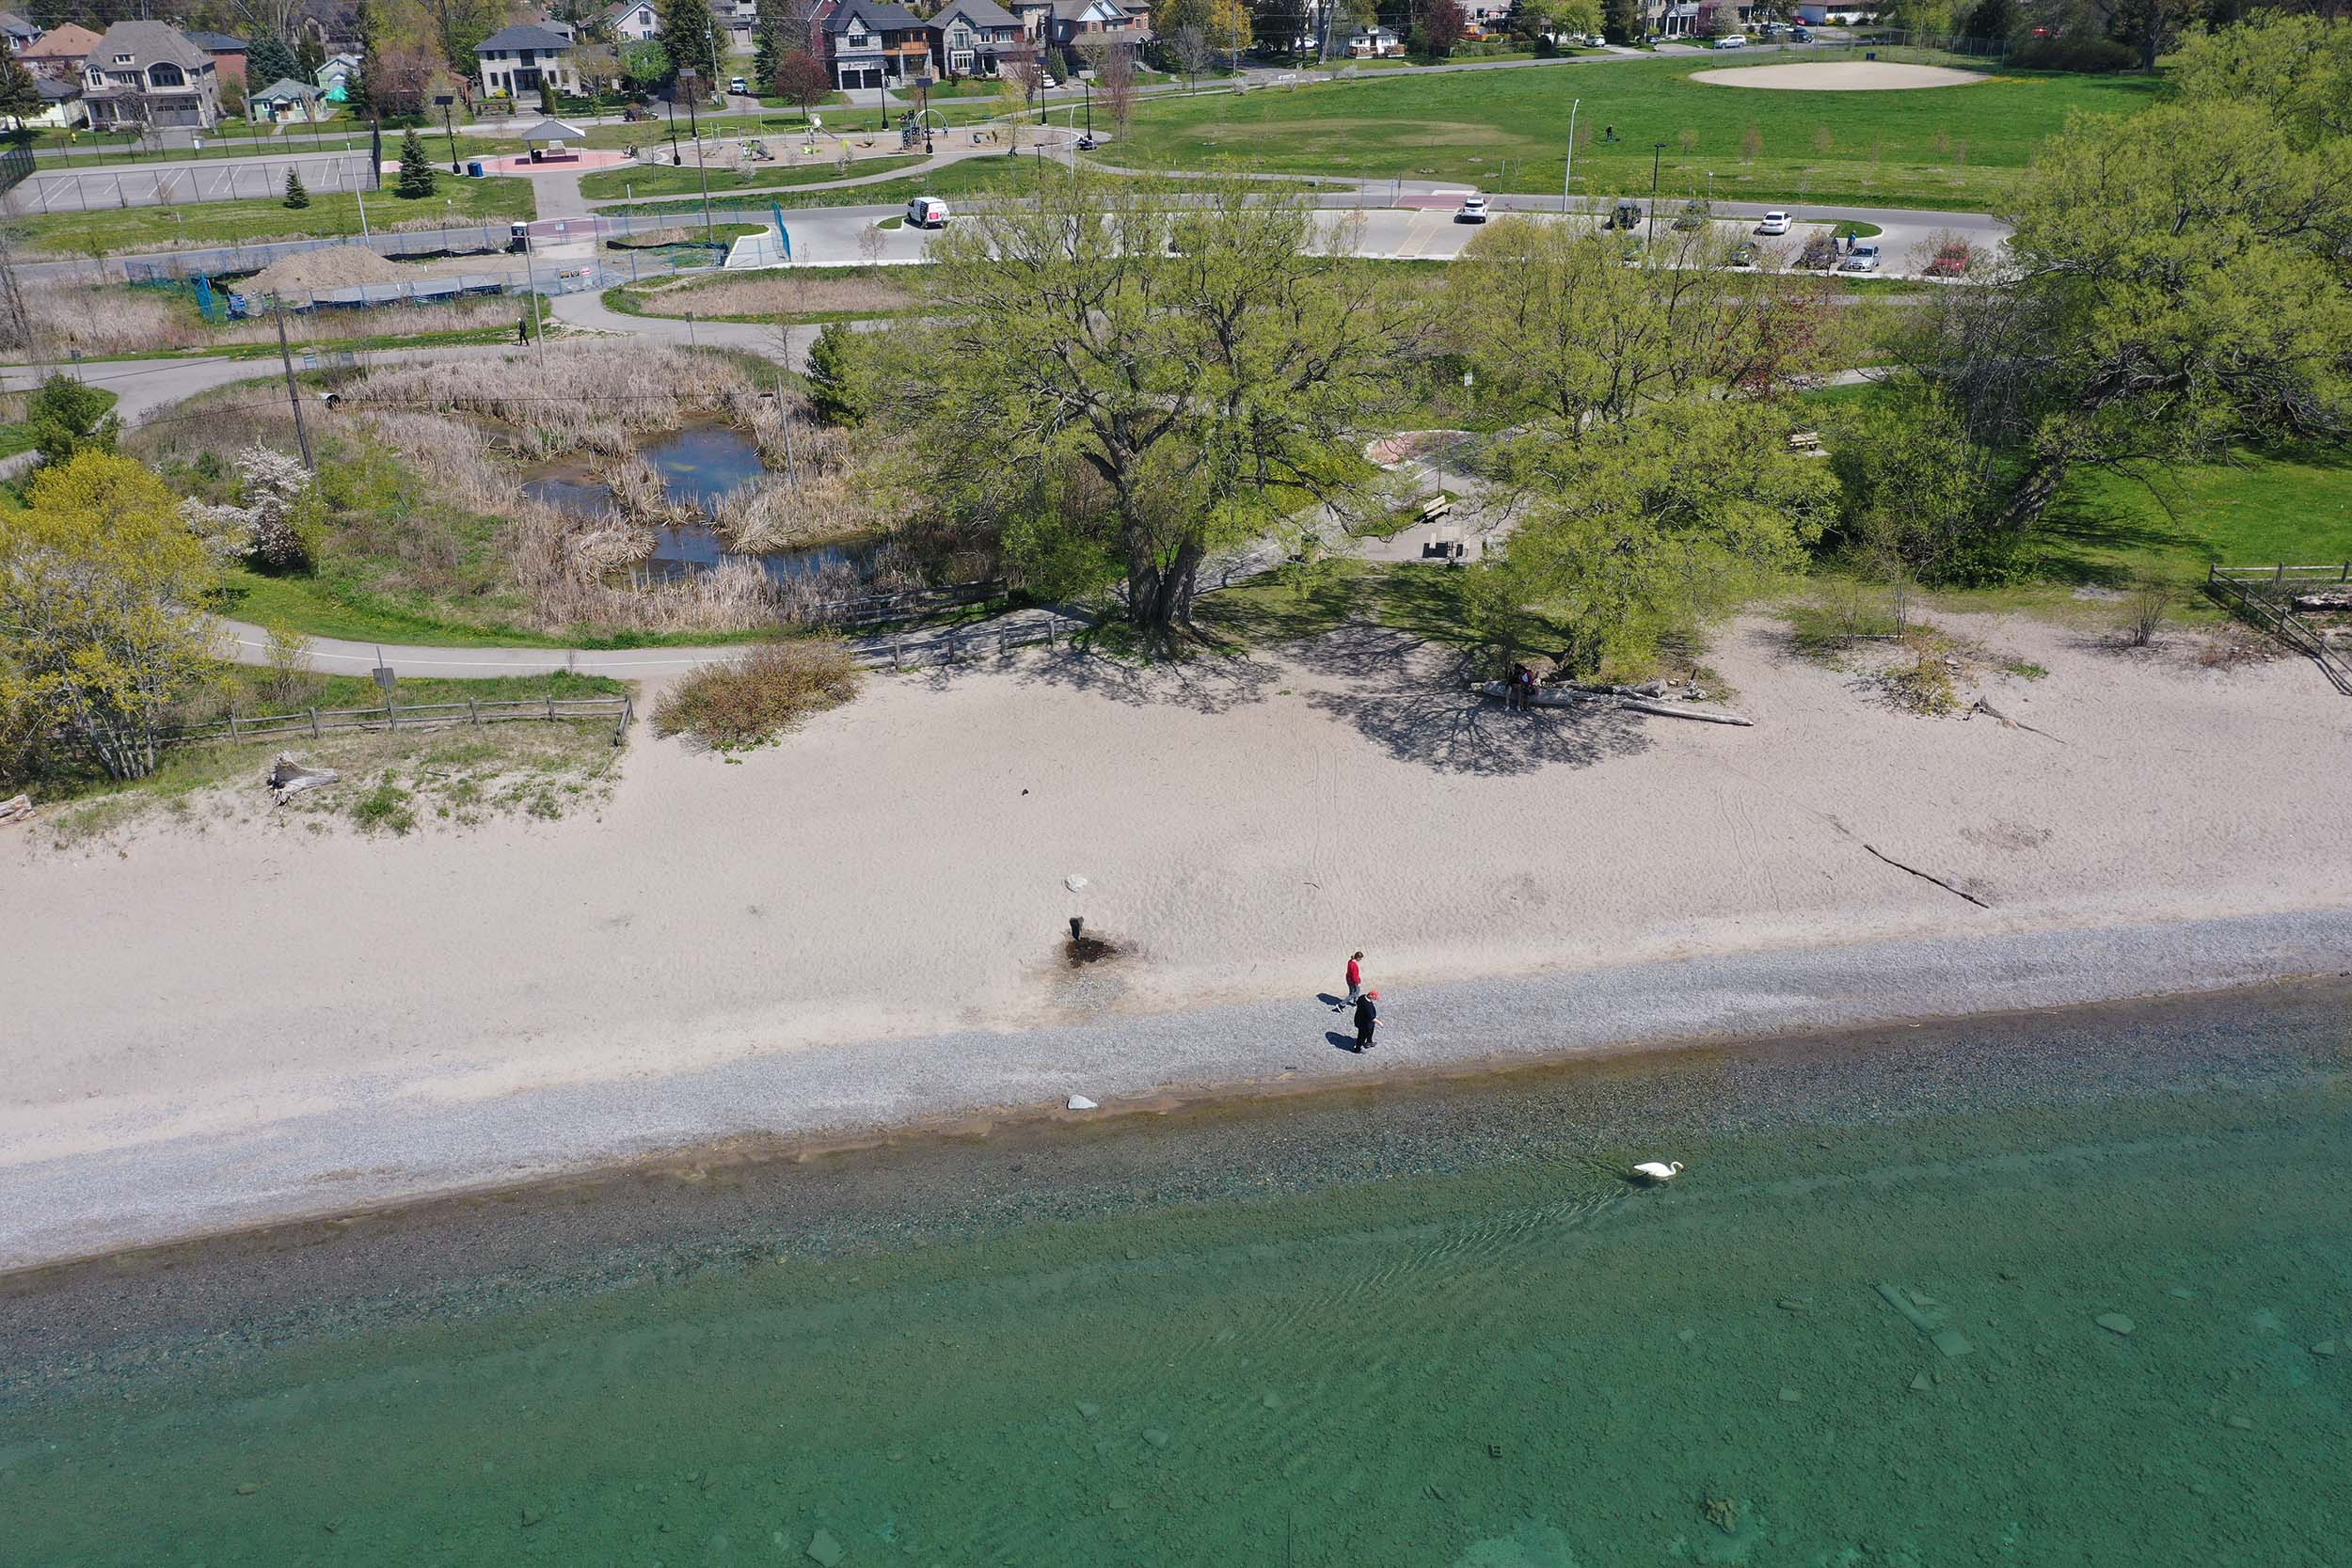 Aerial view of Paradise Beach taken from over Lake Ontario, with a parking lot and pond in the background. Two people are walking on the beach.